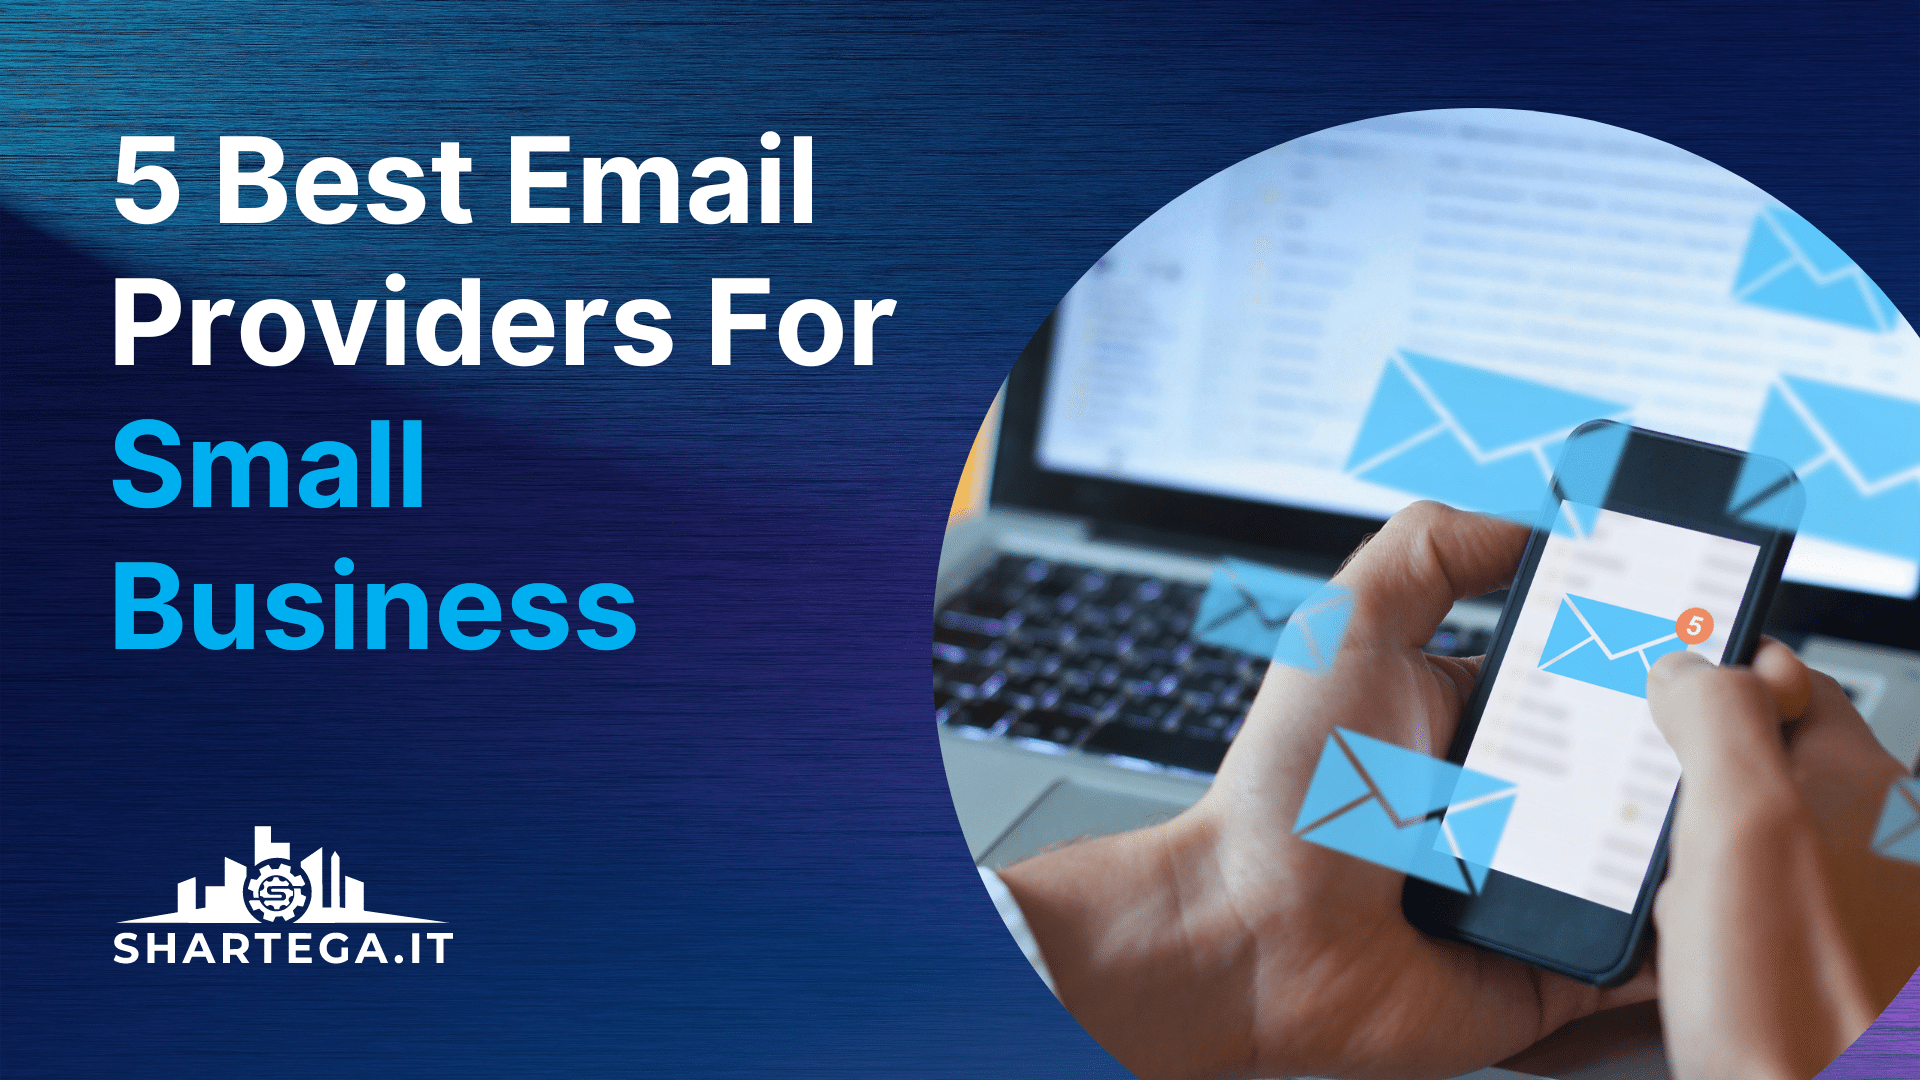 5 Best Email Providers For Small Business